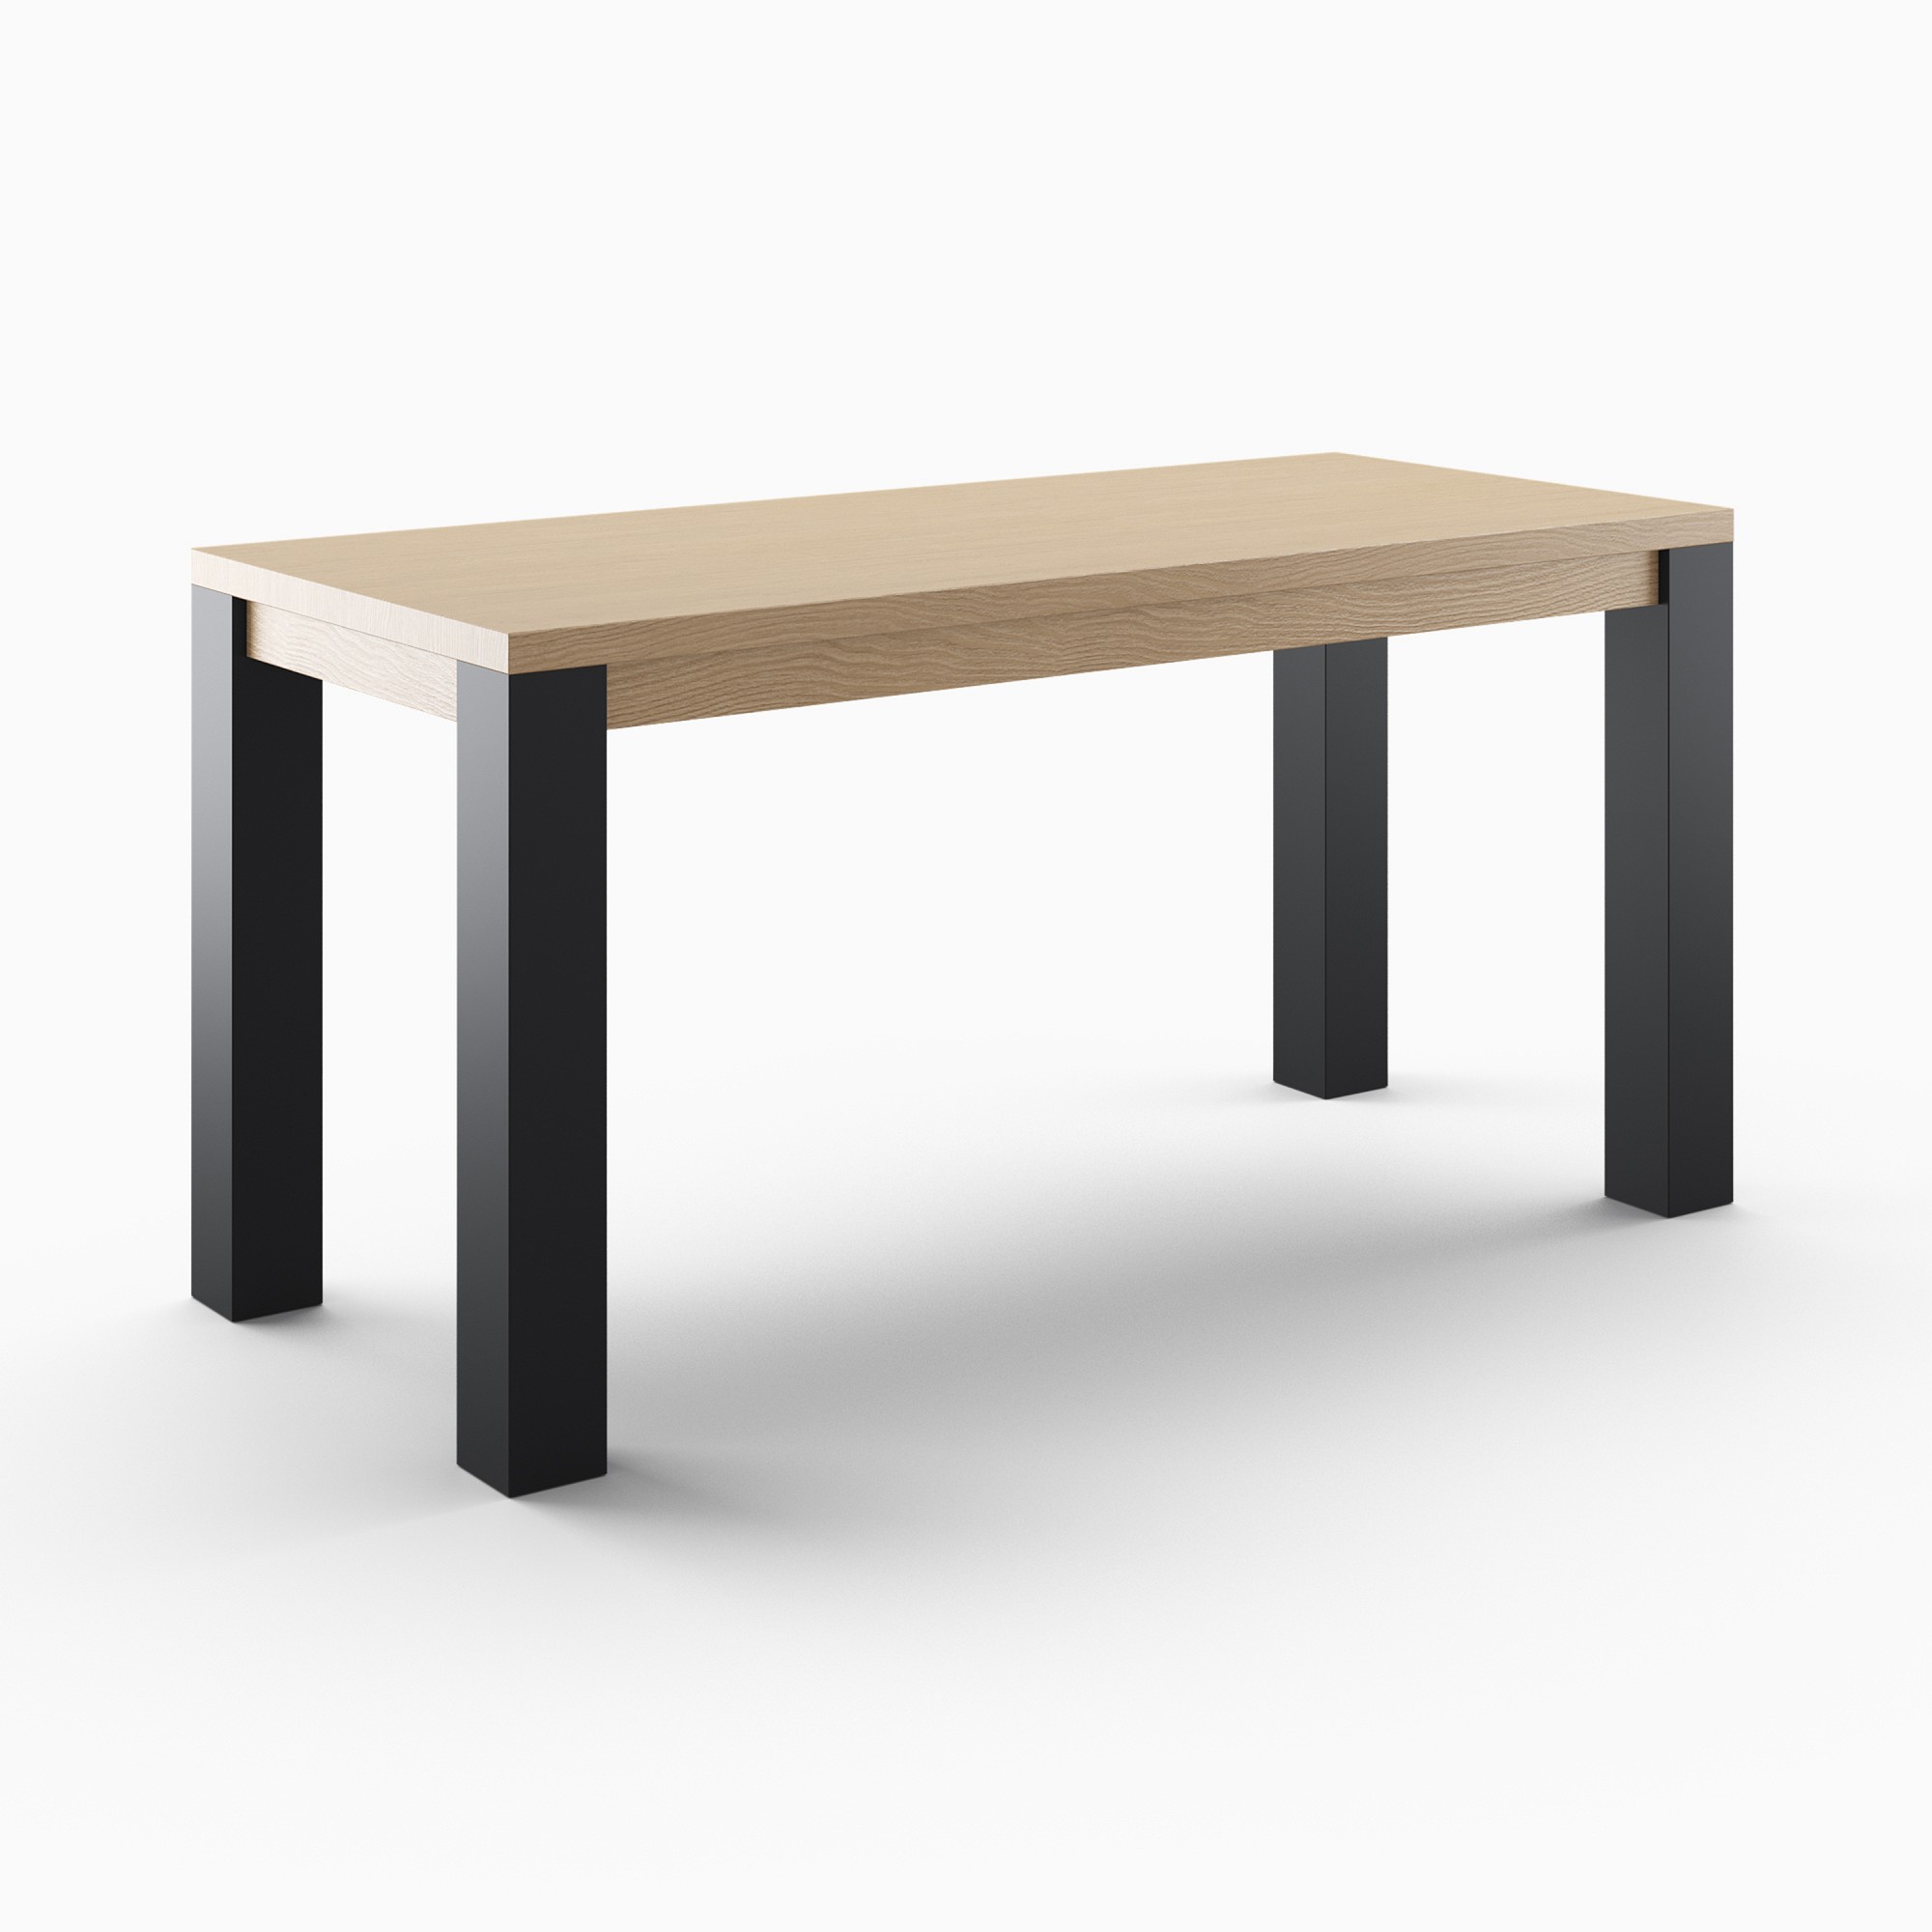 Harlow Counter Height Communal Rectangular Dining Table